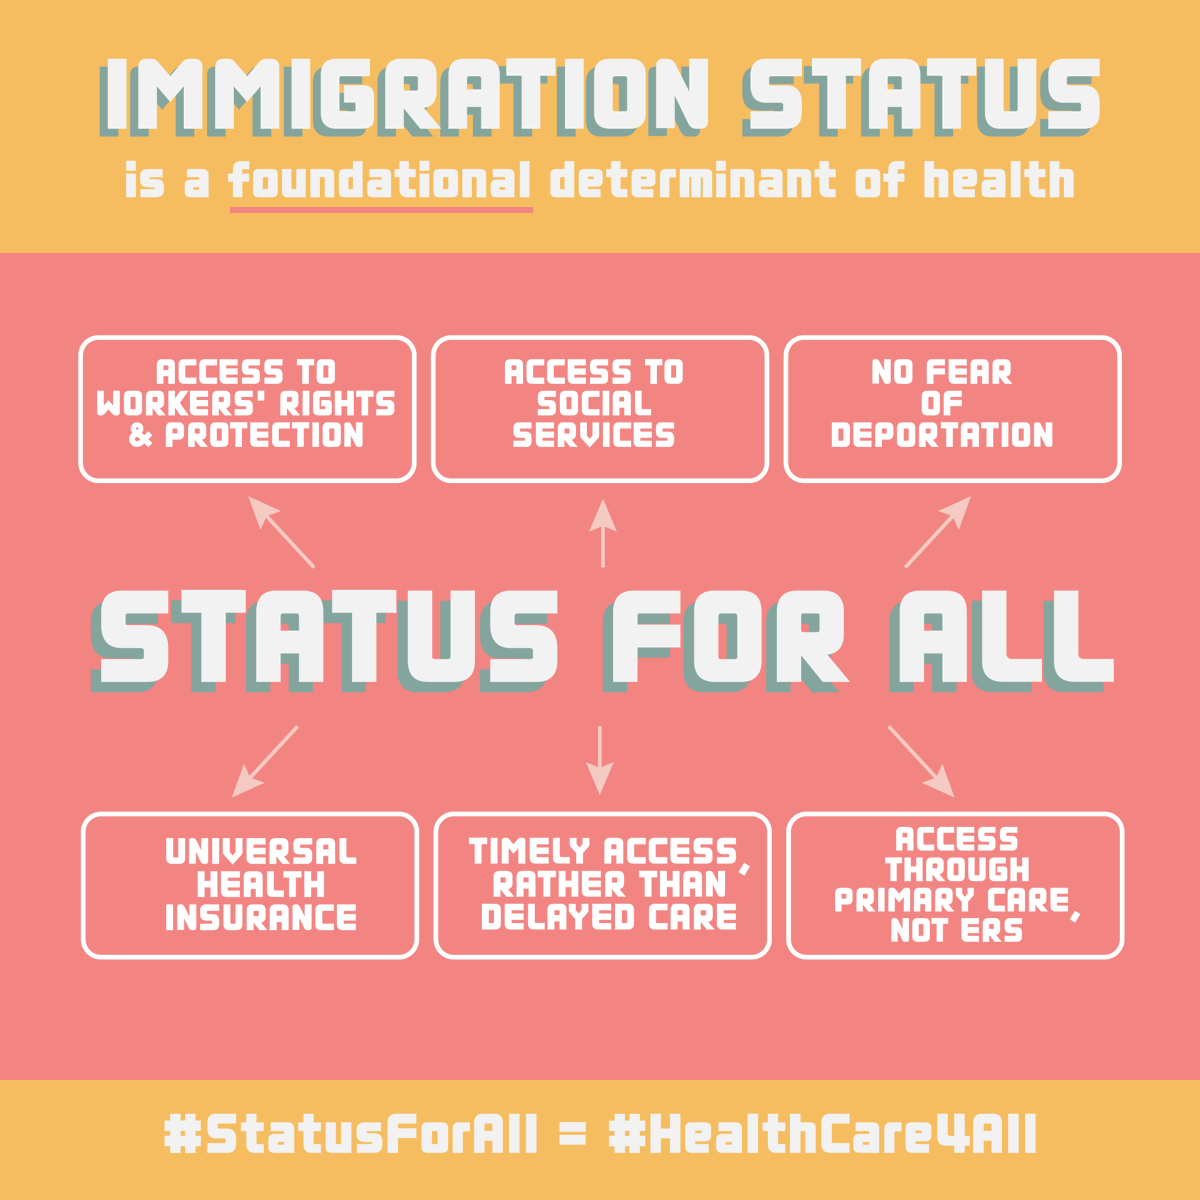 📢📢📢Immigration status is a foundational determinant of health. DEADLINE IS TODAY to sign letter below, calling on federal government to provide full and permanent immigration #StatusForAll migrants in Canada. No one should be left behind. SIGN HERE -- bit.ly/sTATUs